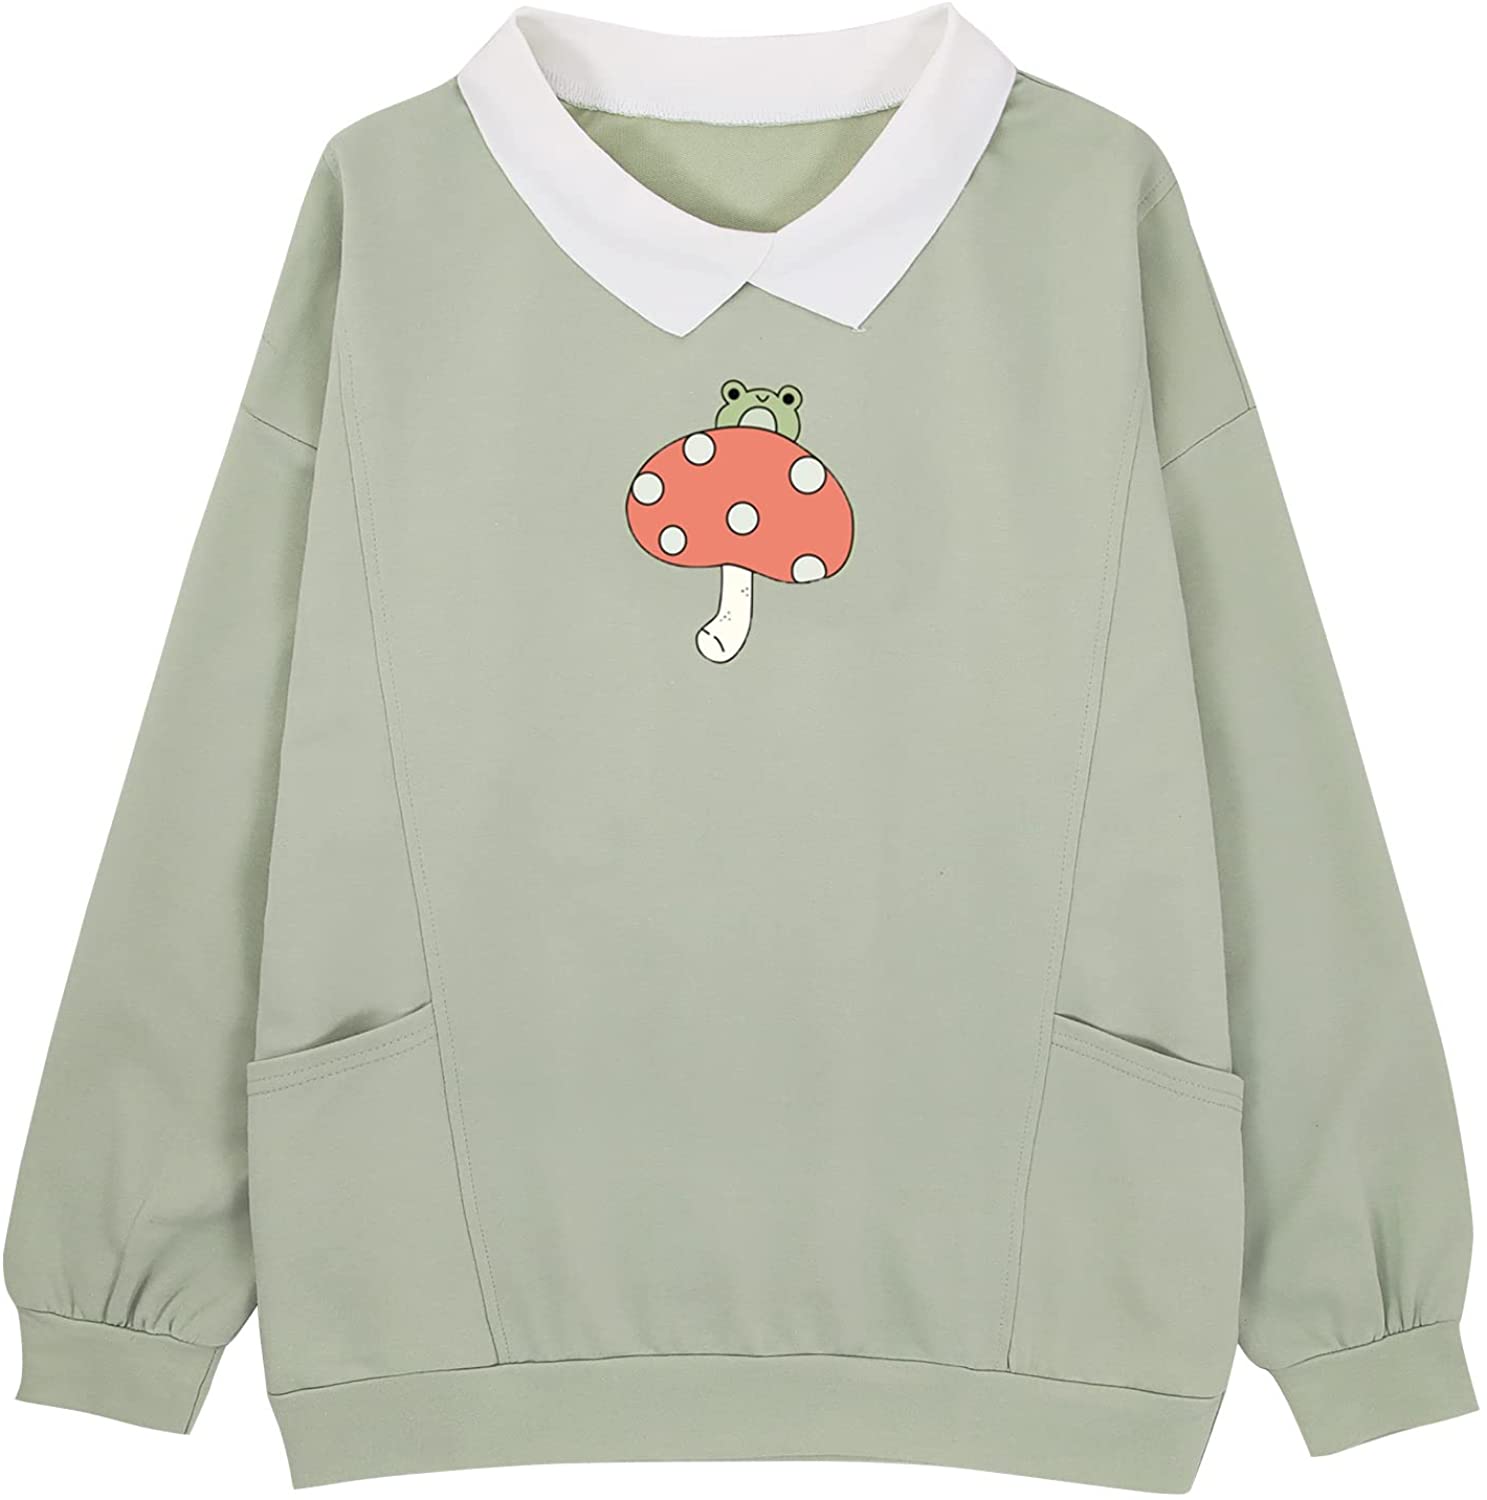 CM C&M WODRO Boys Sweatshirts Pullover T-Shirts Toddler Cotton Cute Tops Tee Long Sleeve Outdoor Outfit 